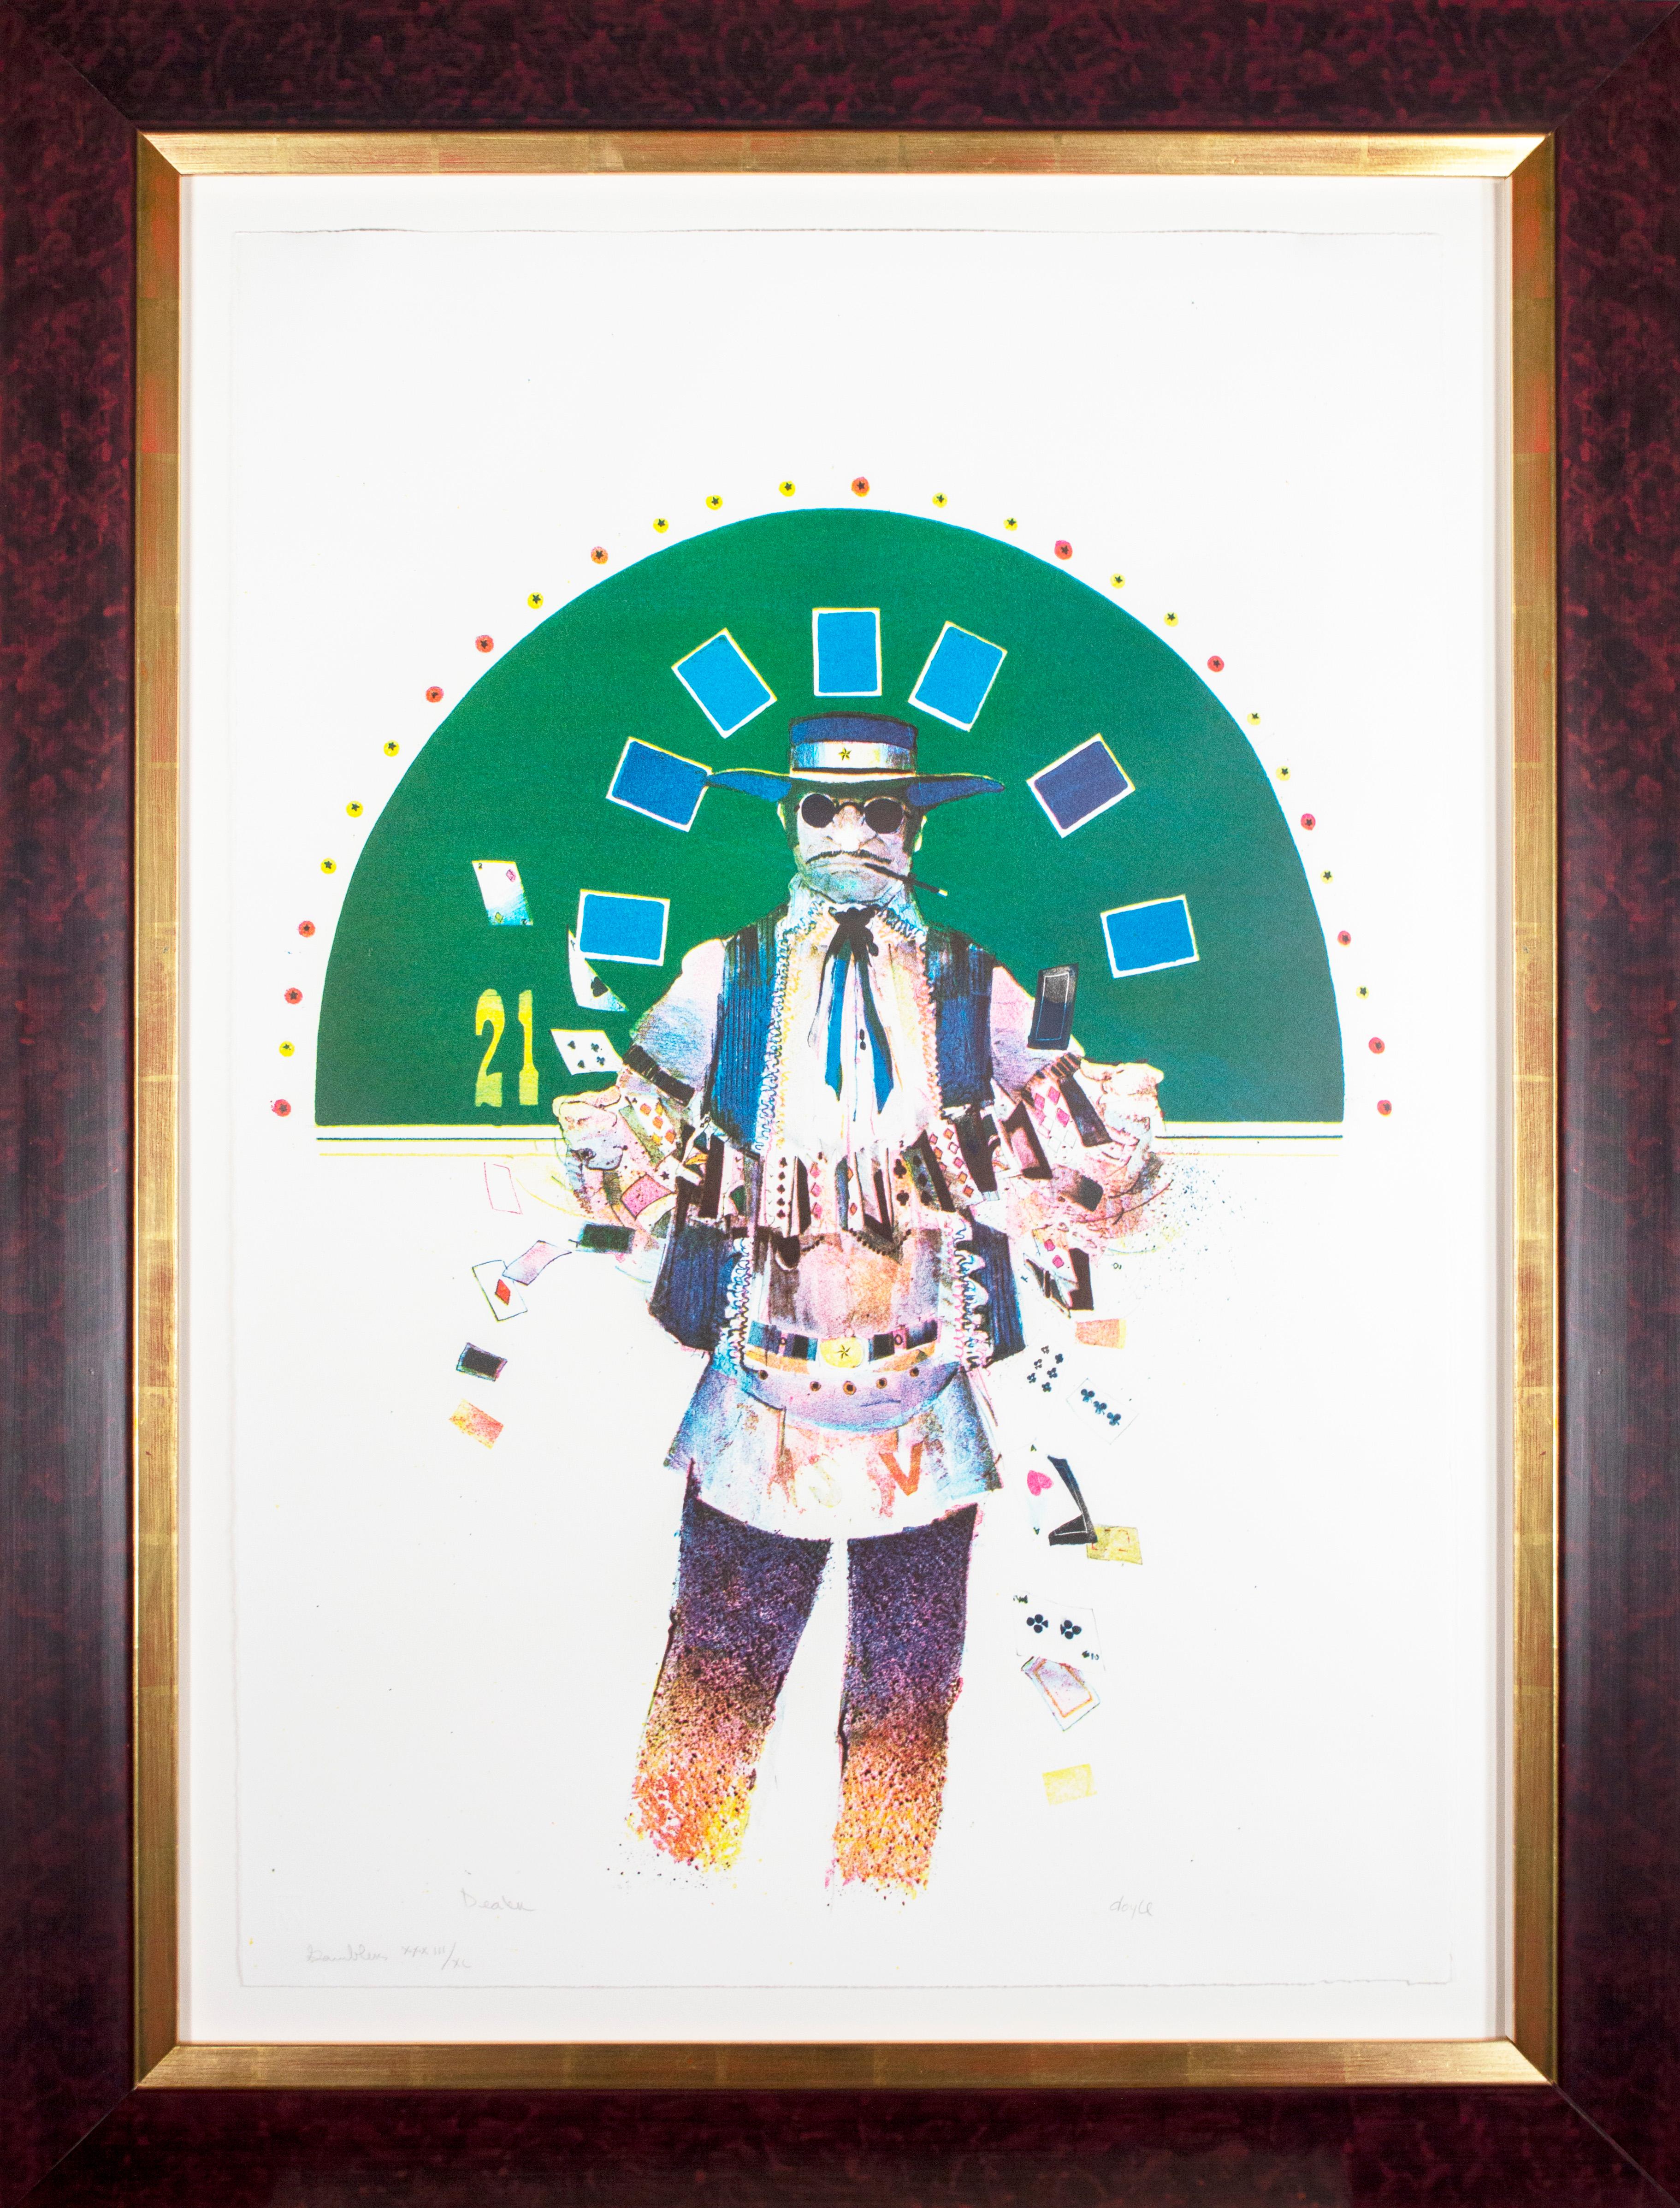 'The Dealer' original signed color lithograph from the Gambler Series 